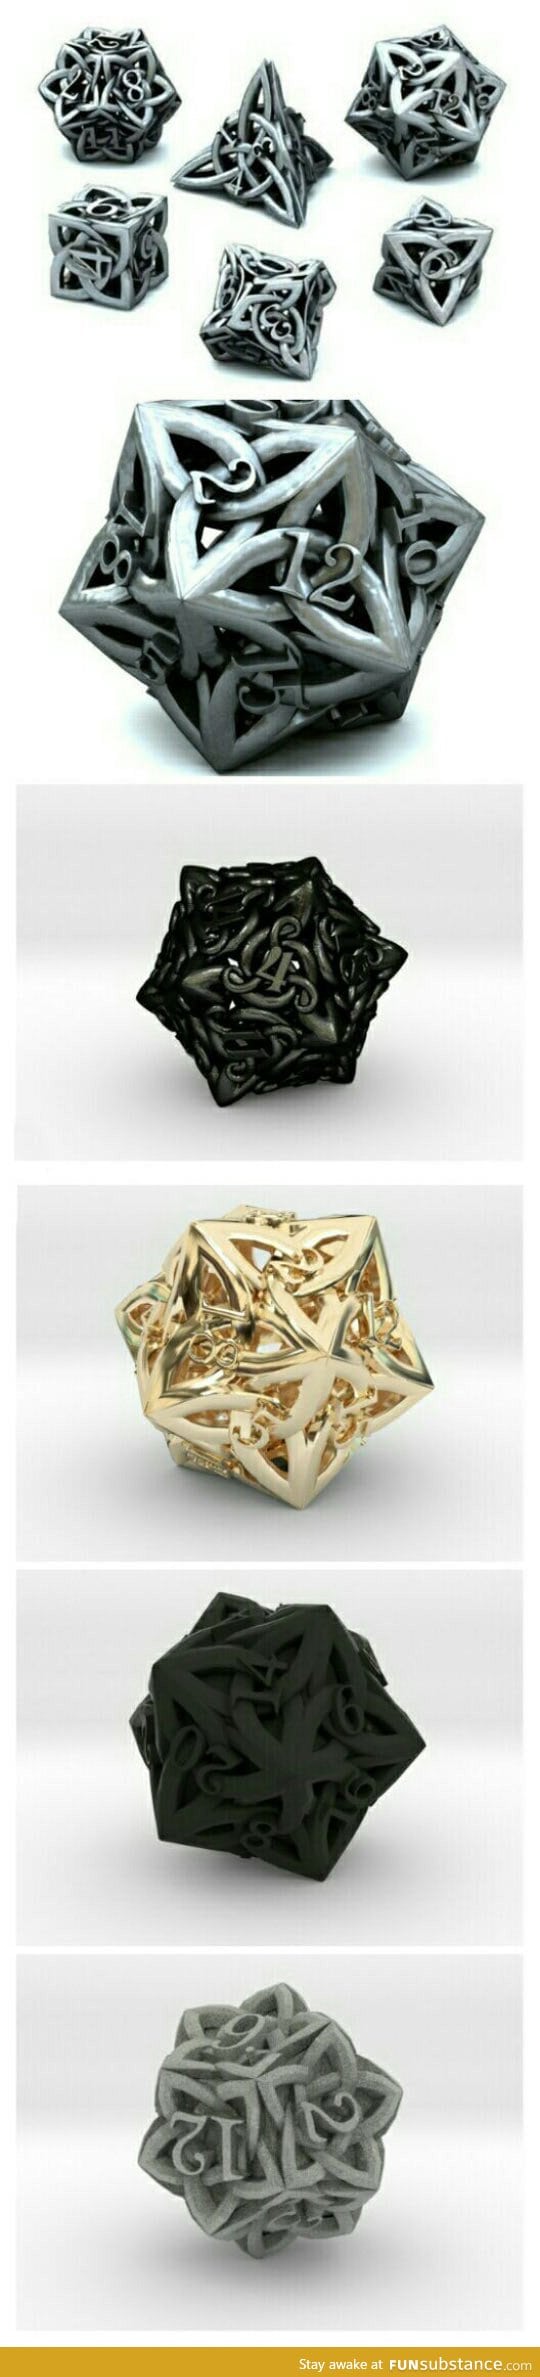 I want these dice